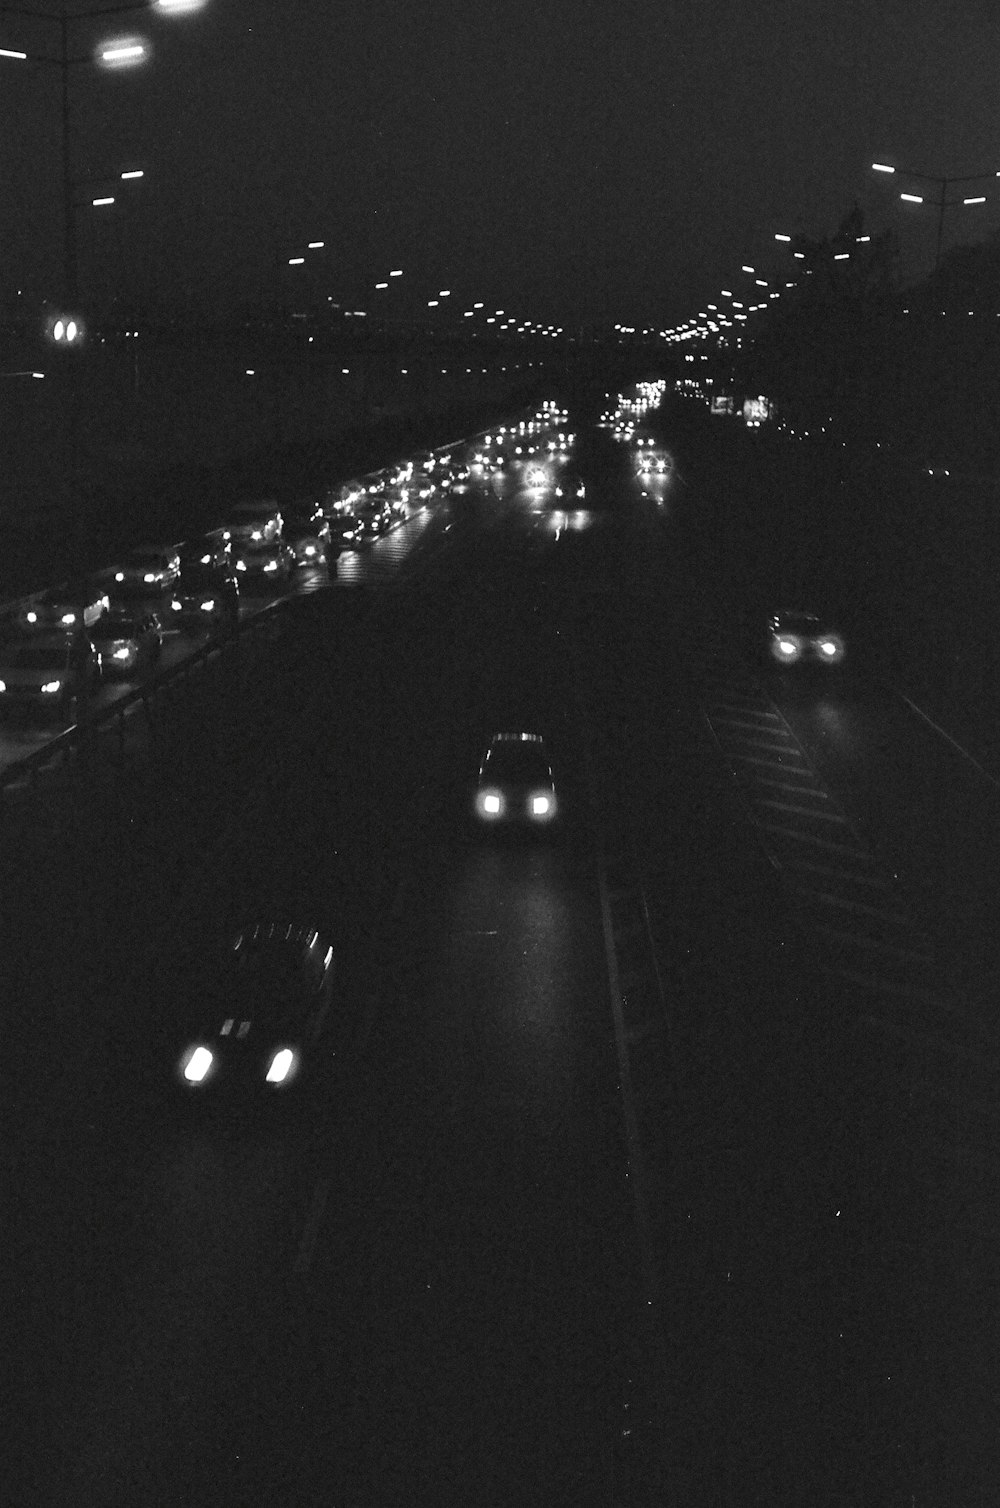 a black and white photo of a highway at night